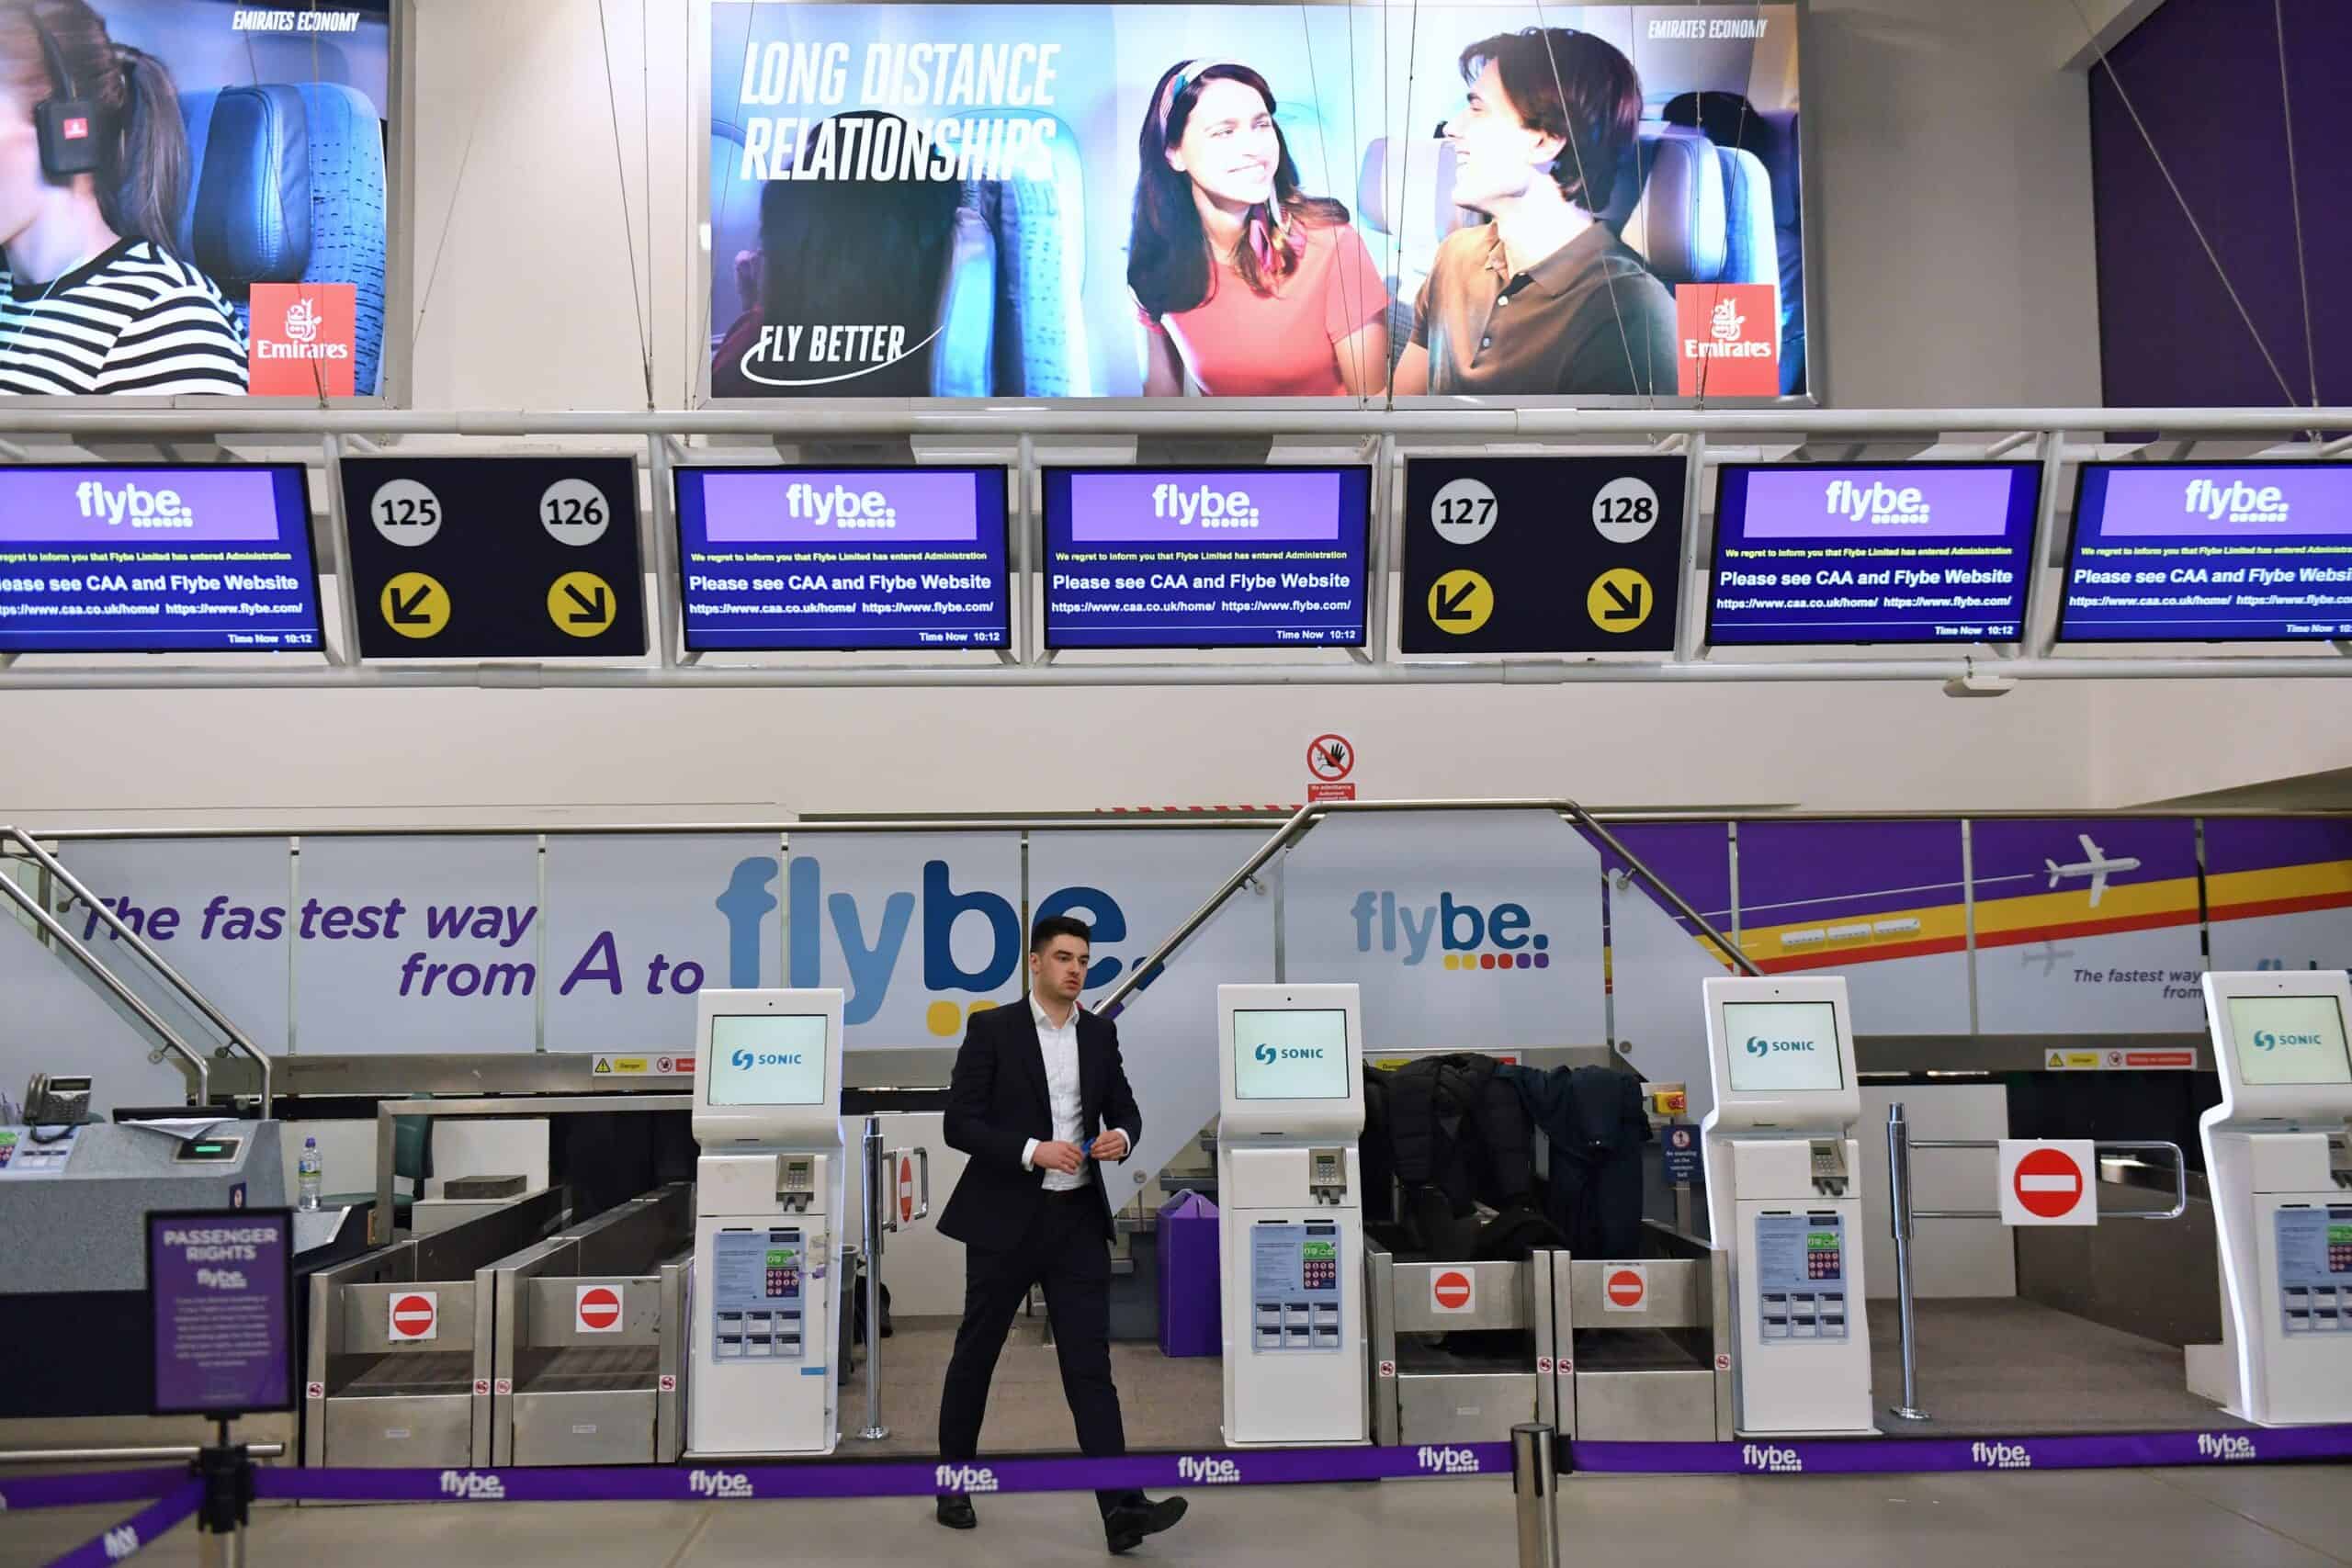 Flybe ceases trading with all scheduled flights cancelled